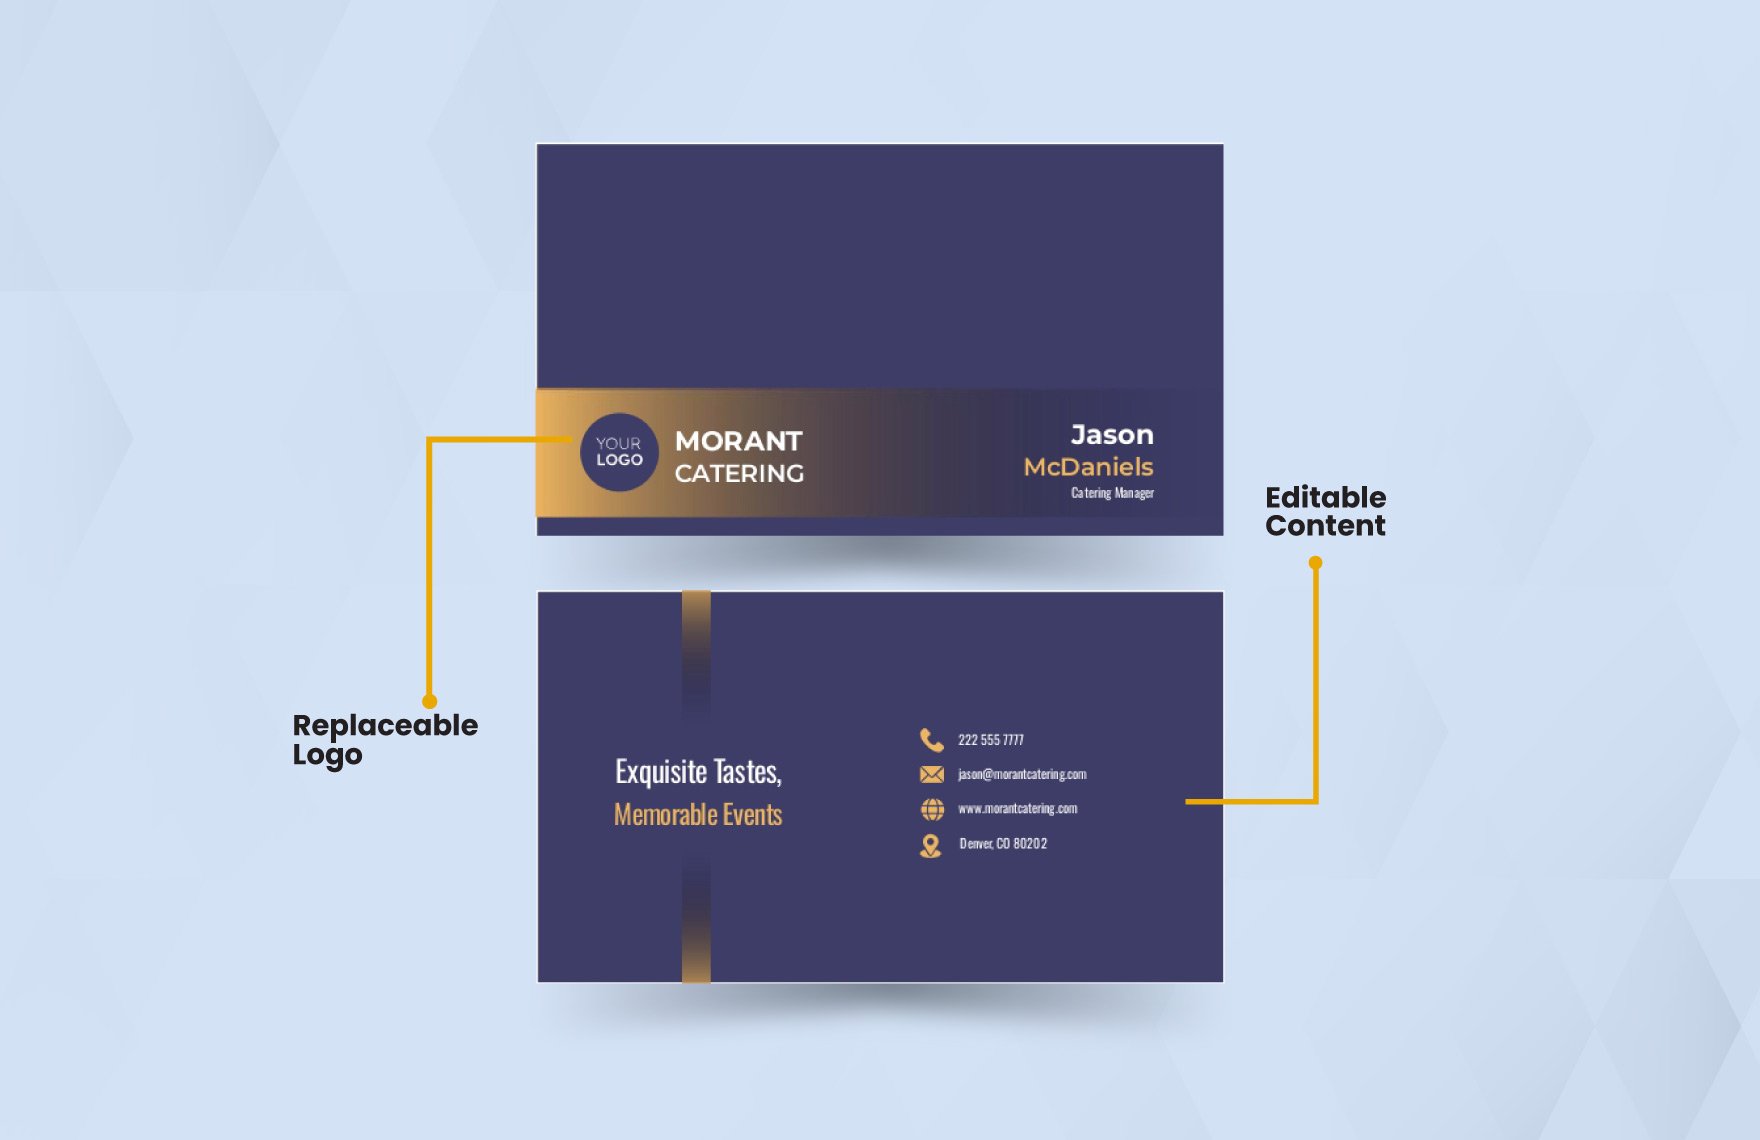 Double Sided Business Card Template